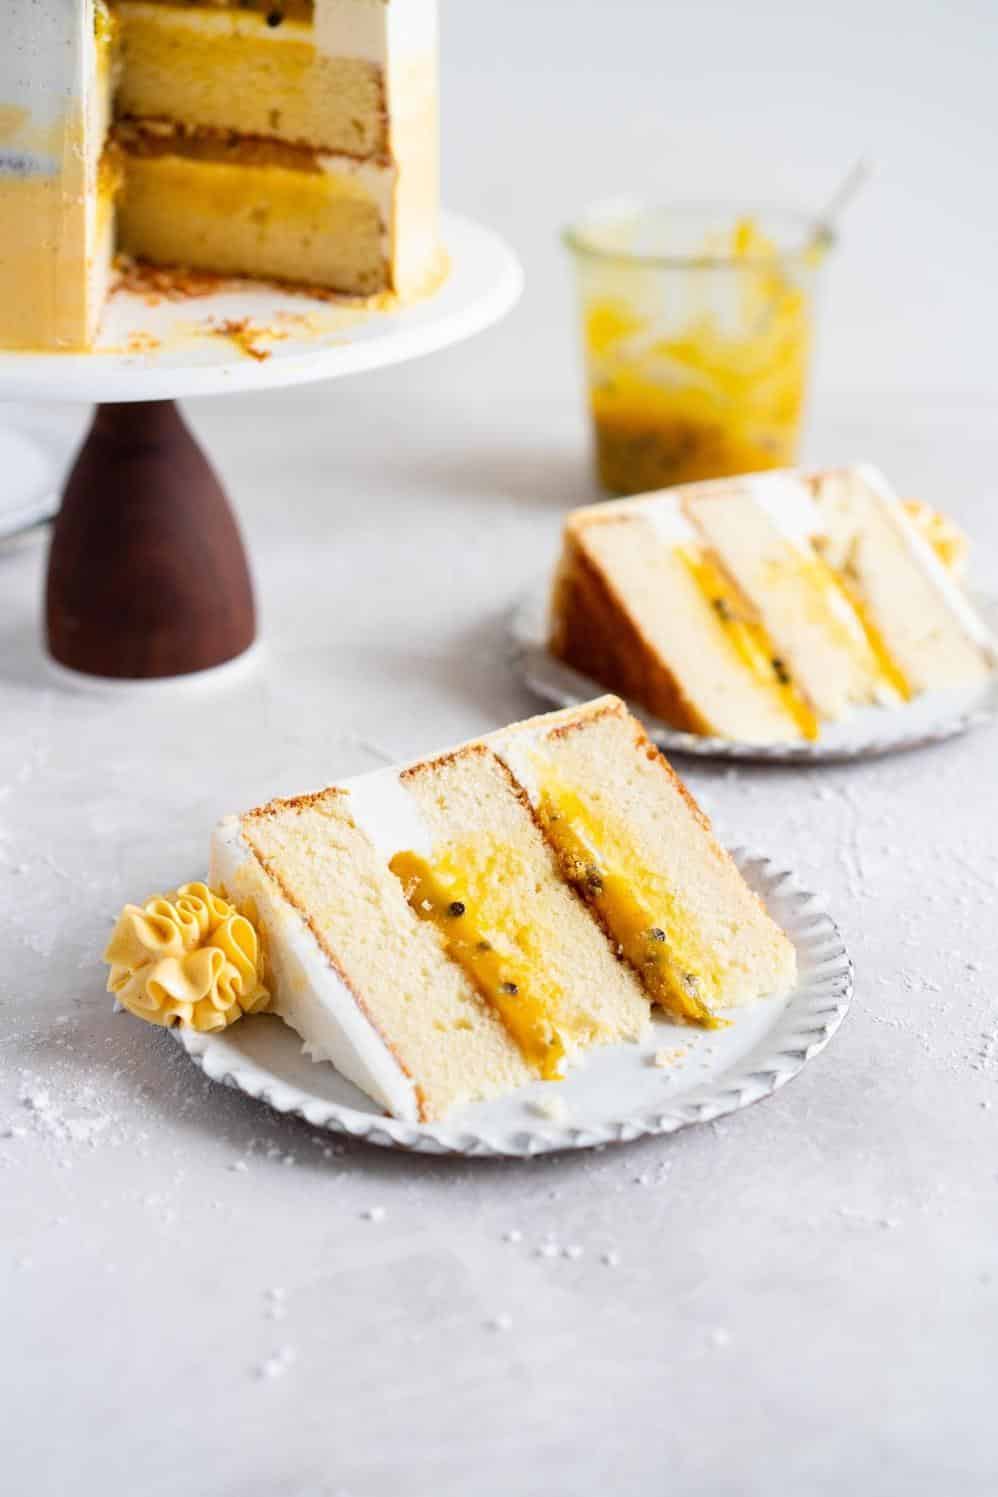  The lilikoi and passionfruit curd add a dreamy, creamy texture to every slice.